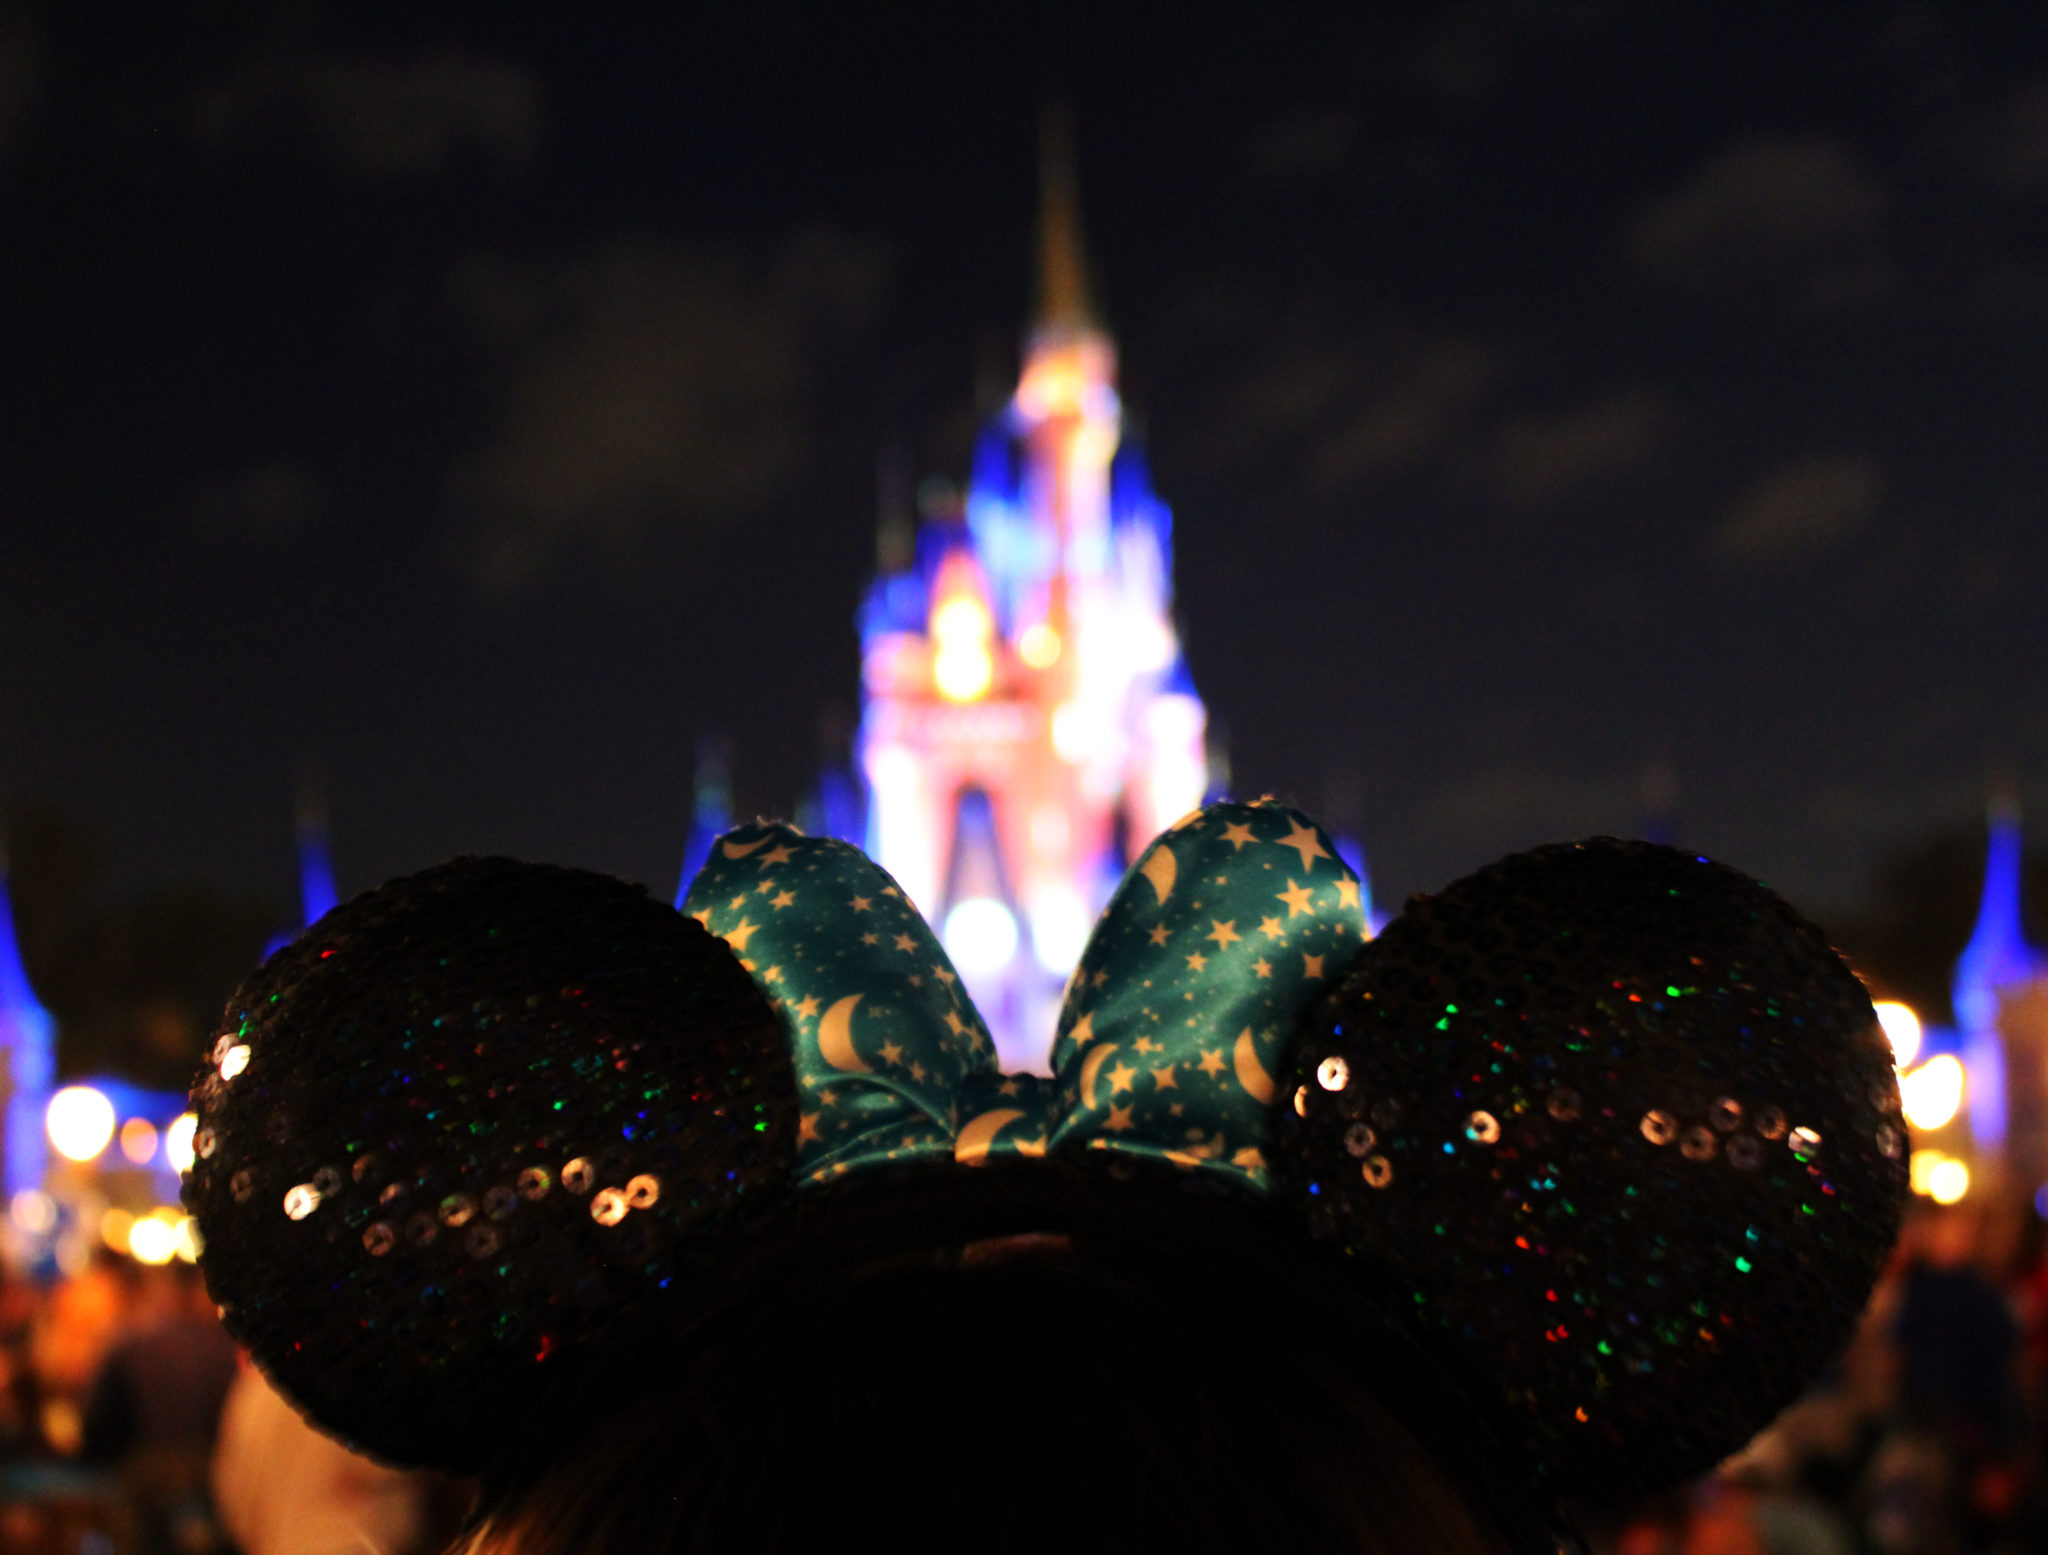 The back of Chelsea's head with Minnie ears looking at the Castle.